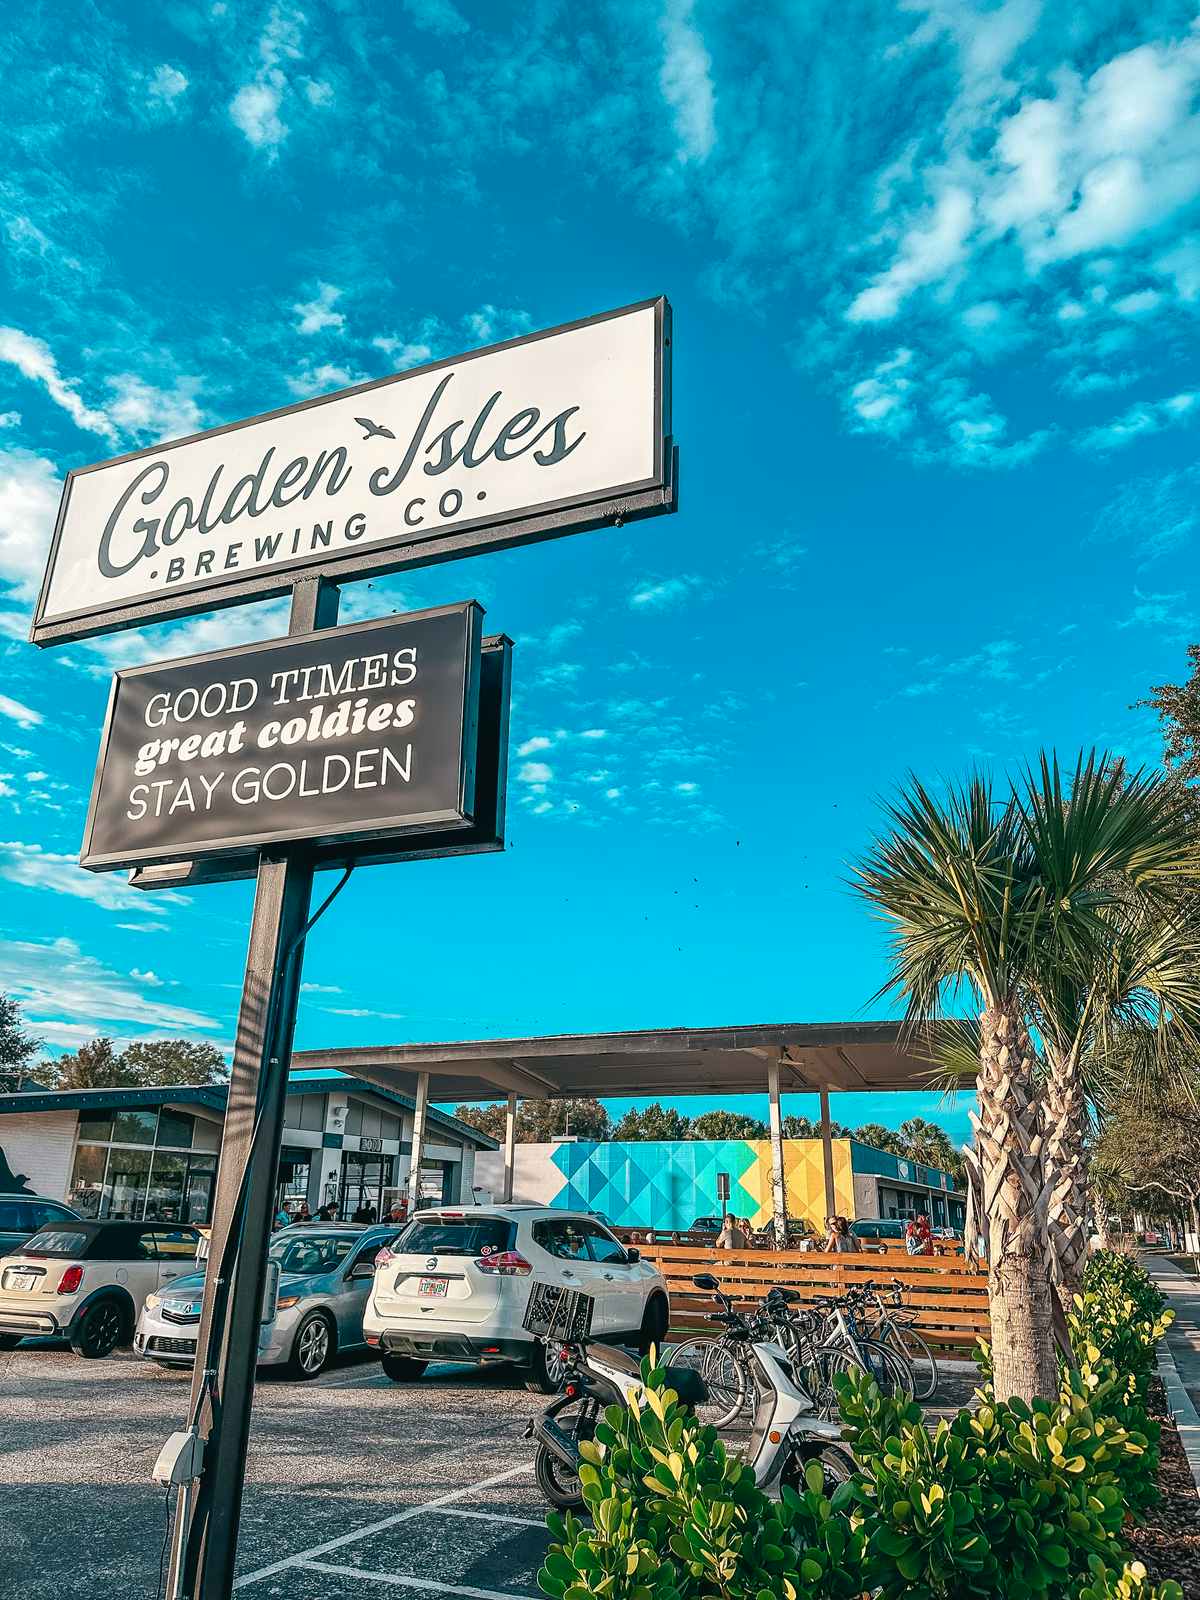 Golden Isles Brewing Co in St Pete